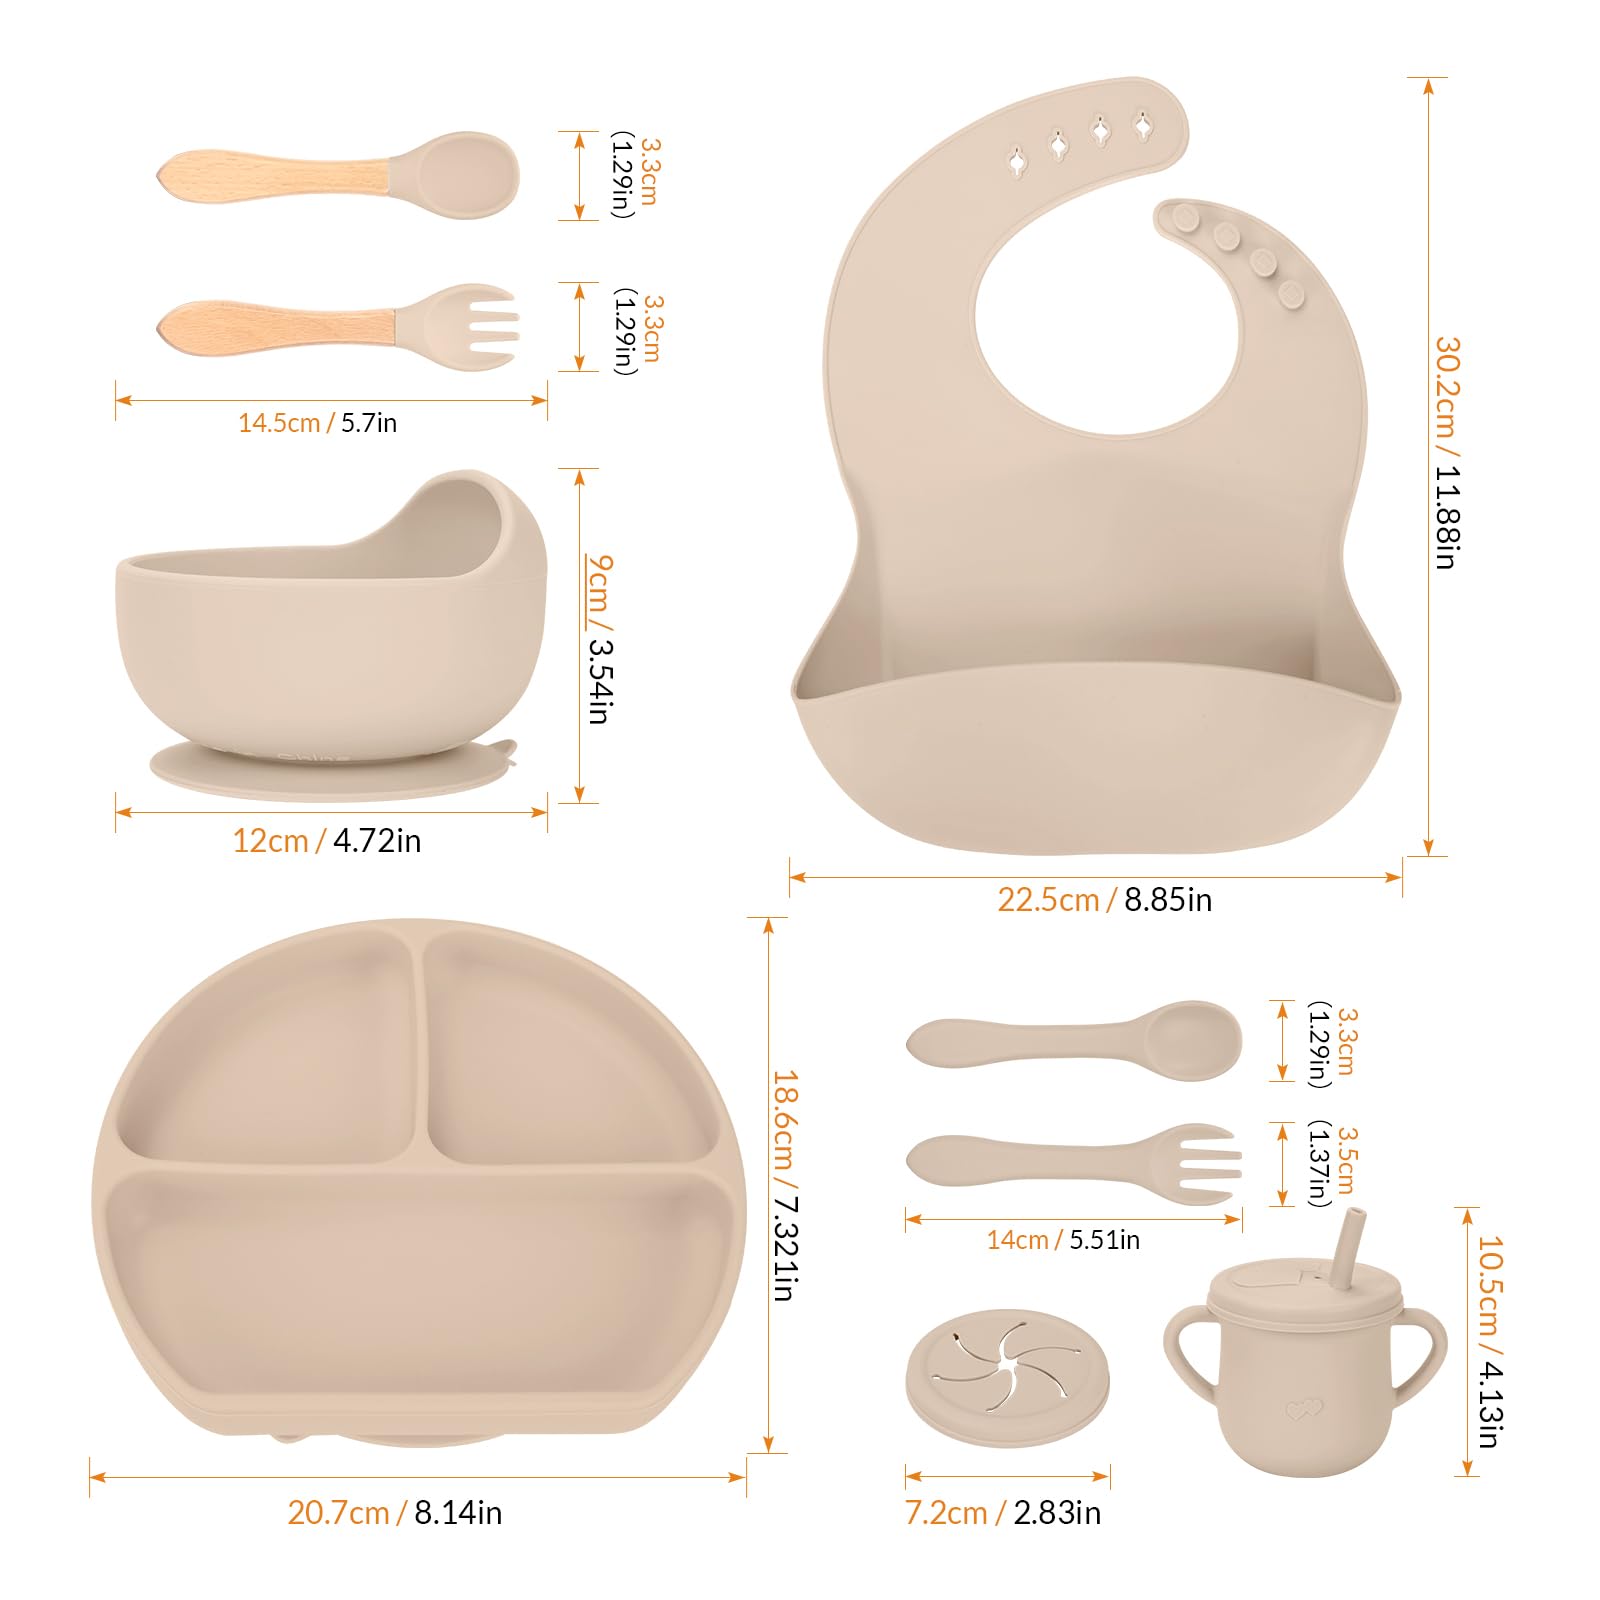 Silicone Baby Feeding Set - REIKTLUD Baby Led Weaning Supplies - Silicone Suction Bowls Divided Plates, Sippy and Snack Cup - Toddler Self Feeding Eating Utensils Set Bib, Spoons, Fork (Grayish-white)